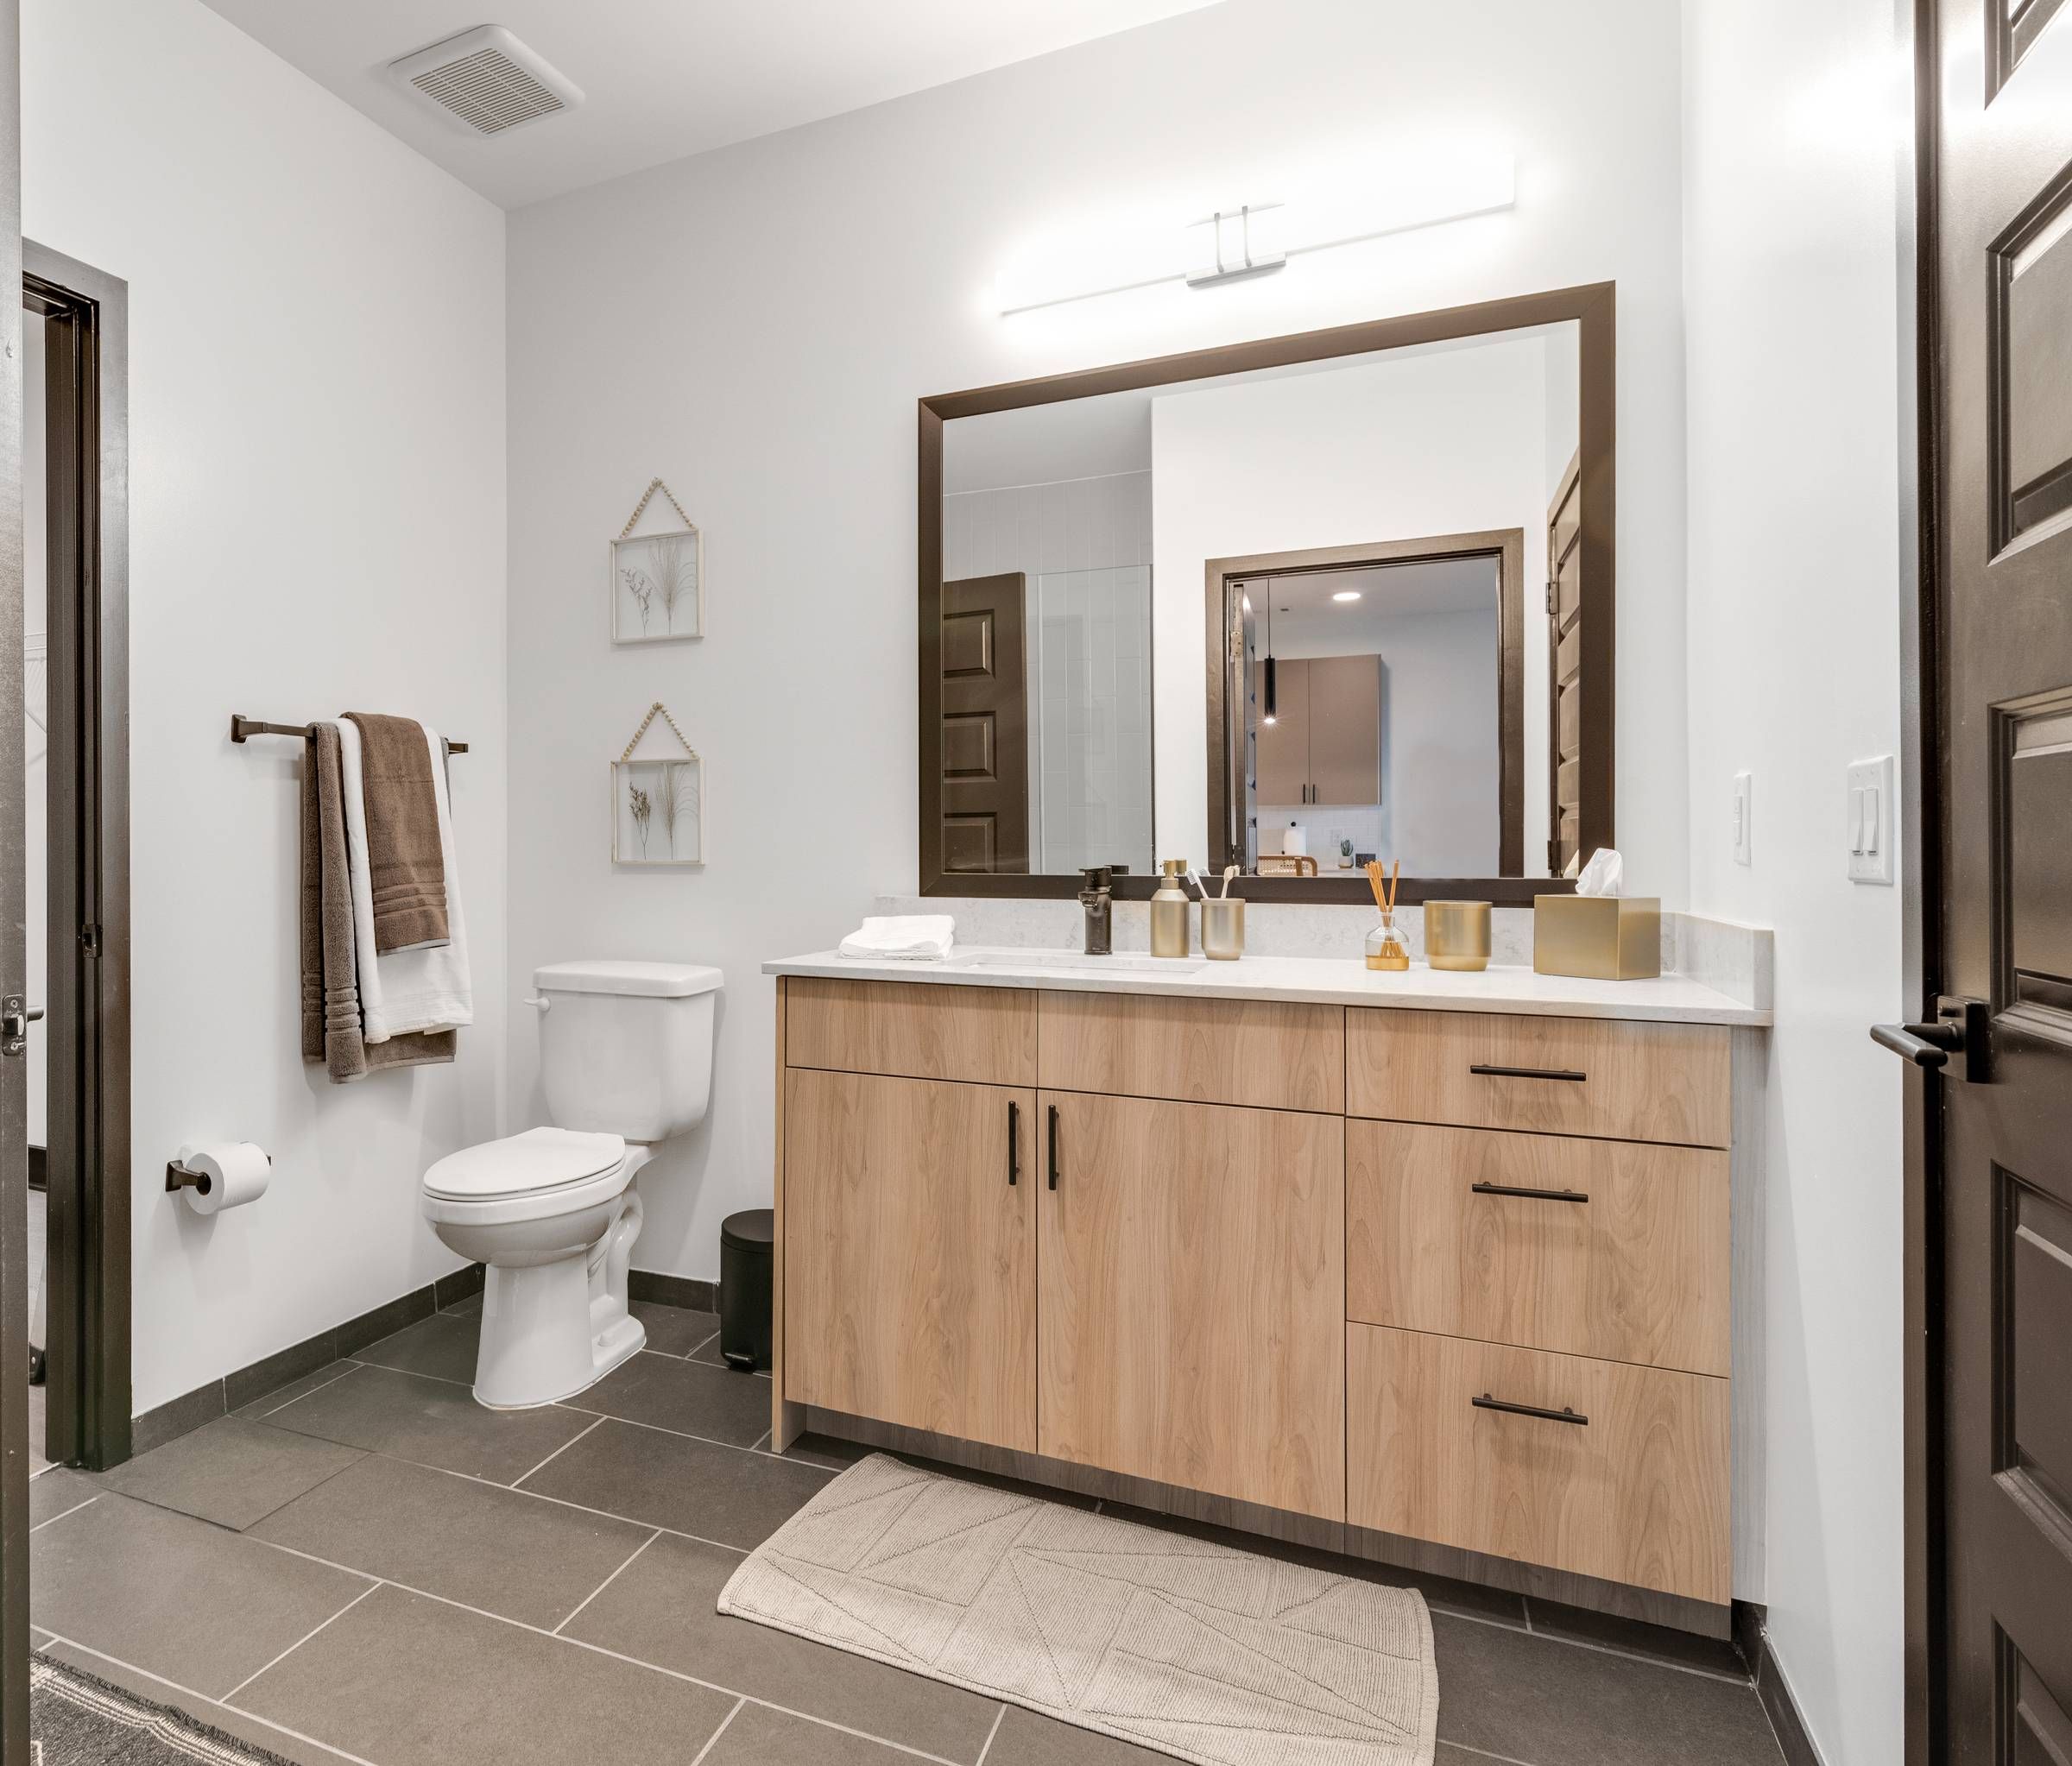 Alta Riverwalk bathroom with ample cabinet space and large mirror.